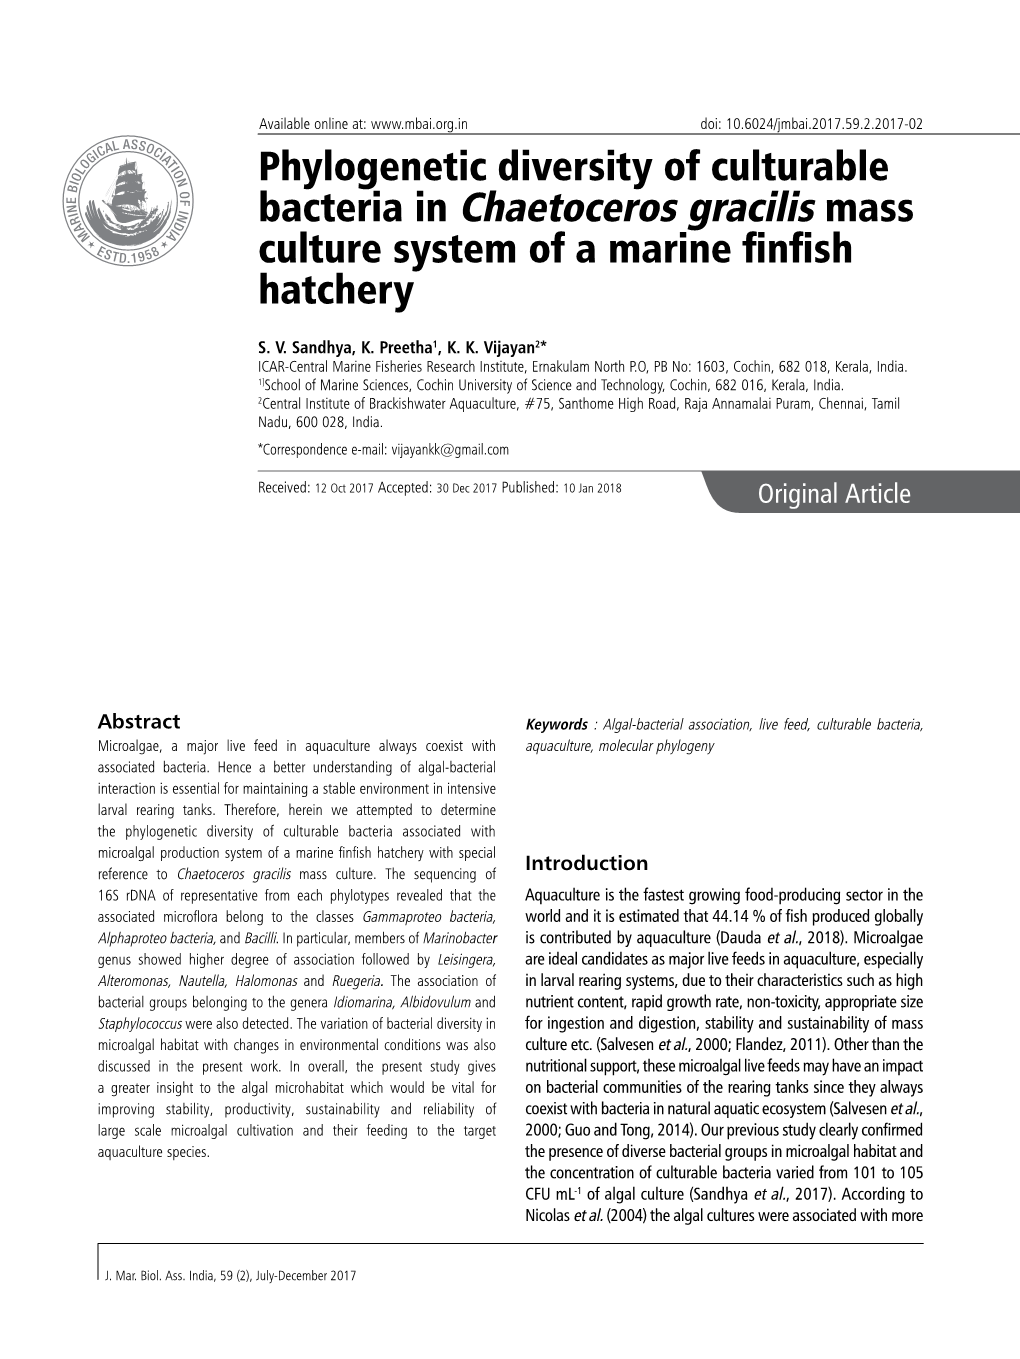 Phylogenetic Diversity of Culturable Bacteria in Chaetoceros Gracilis Mass Culture System of a Marine Finfish Hatchery